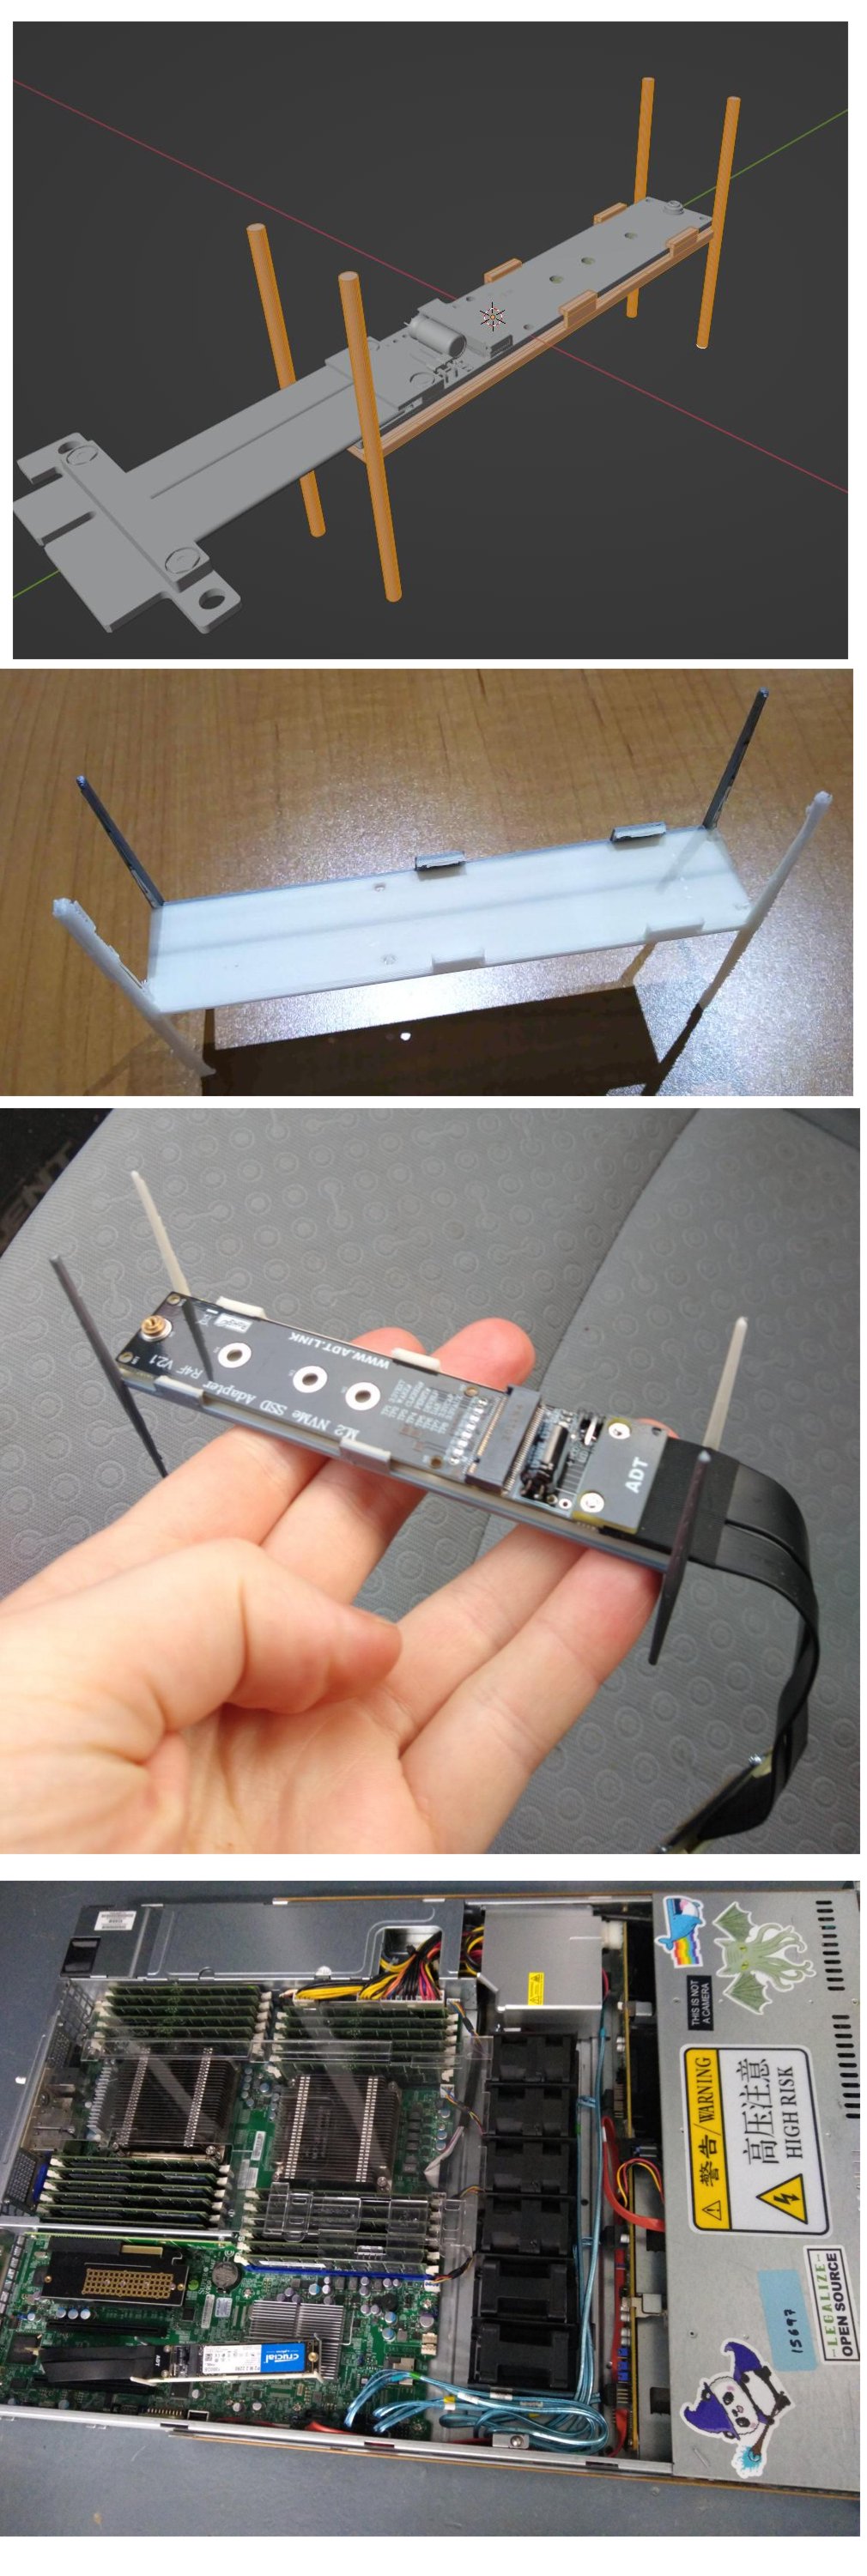 A screenshot and three photos,   the first shows the 3d model of  the bracket interfacing with a 3d CAD model of the NVME adapter.  A photo of the 3d-printed elongated table shaped bracket with clips on the sides and four legs sticking out both the bottom and top,  The same bracket with an ADT brand PCI-e to NVME flexible-cable-based adapter clipped onto the table,  and the same table with a Crucial brand NVME drive installed in the adapter. The whole thing is shown as it fits loosely inside inside Baikal our 1U rack-mounted server. The server is covered in silly stickers including a kawaii panda bear with a wizard's hat and staff, a cthulu, a docker whale with a nyan-cat rainbow behind it, and a WARNING HIGH RISK sticker featuring chinese characters and a high voltage symbol.